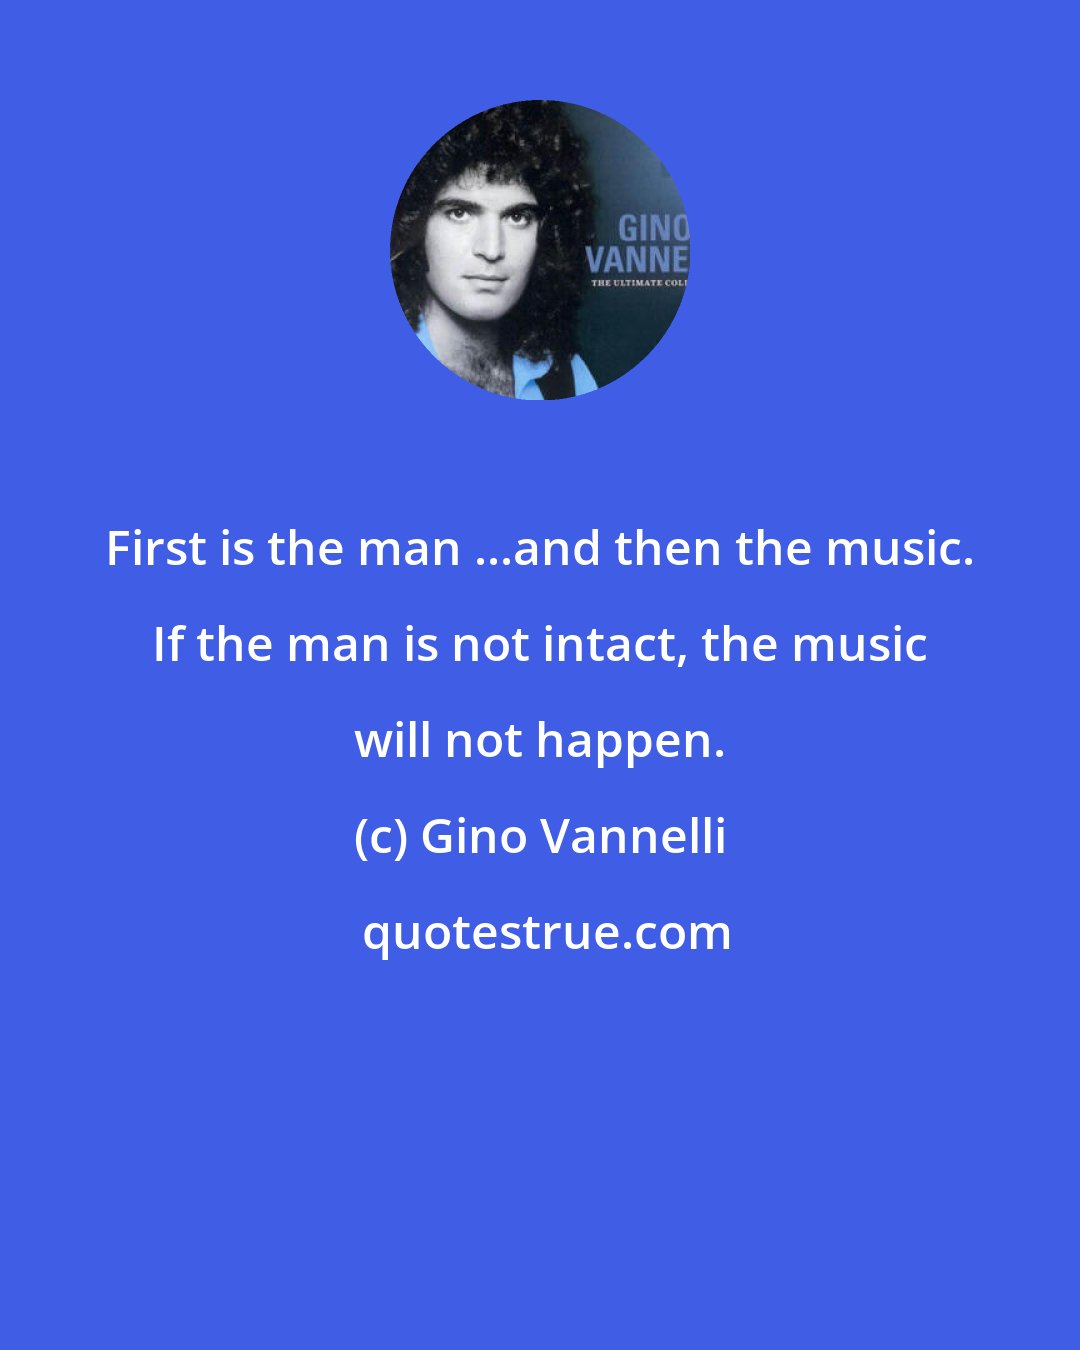 Gino Vannelli: First is the man ...and then the music. If the man is not intact, the music will not happen.